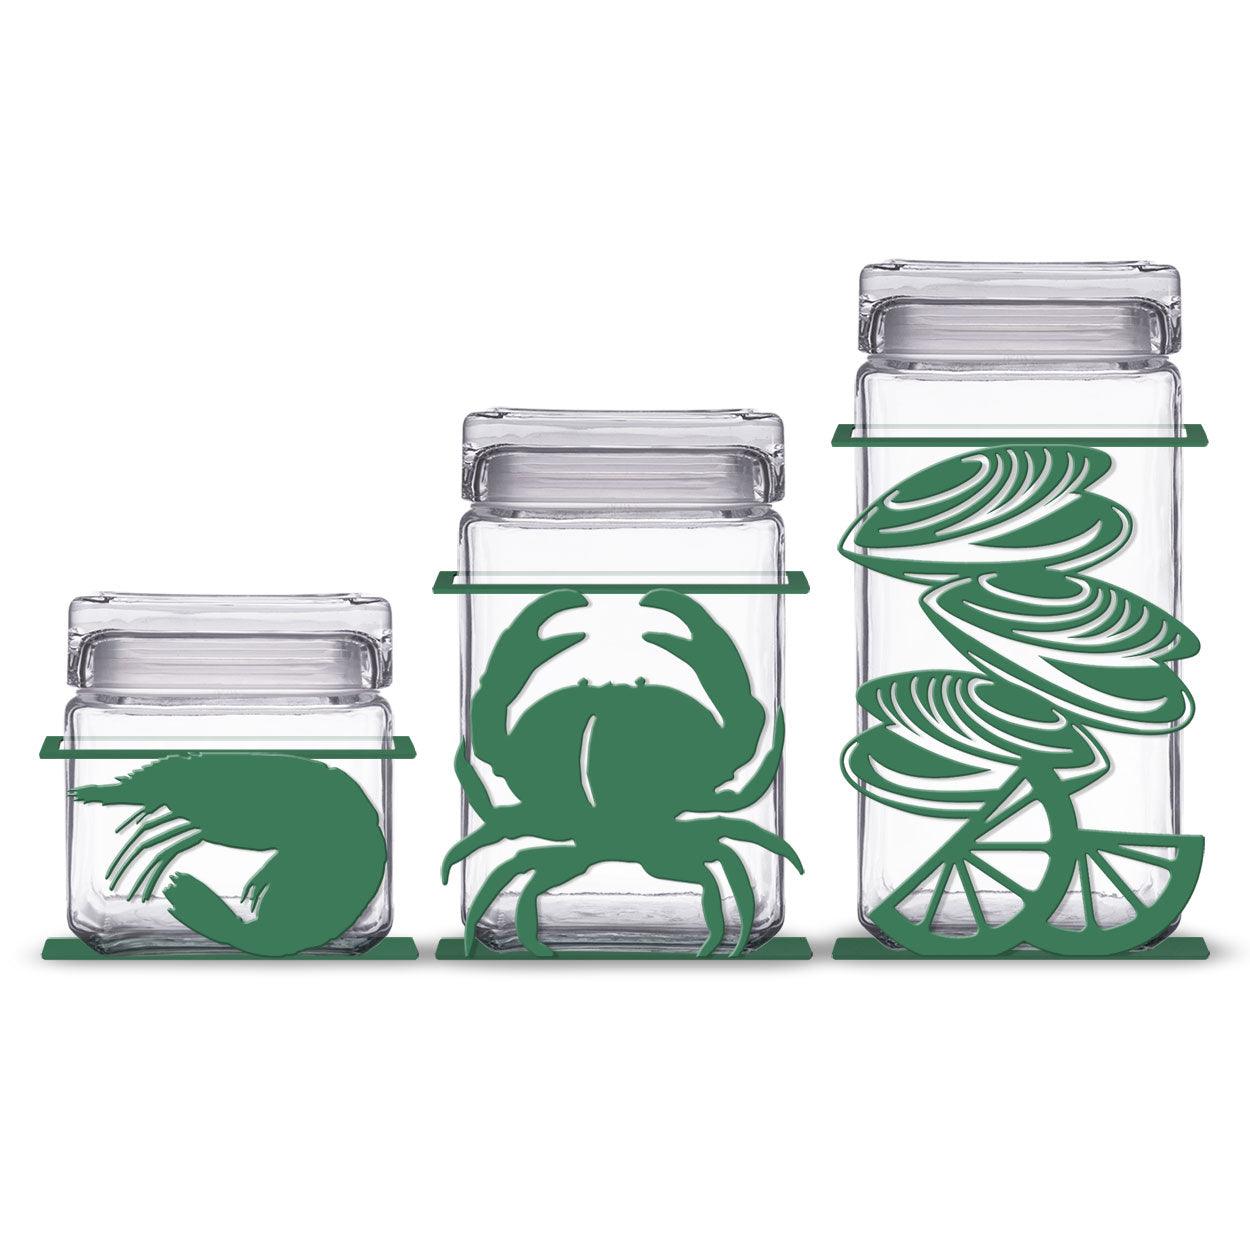 Clambake Metal and Glass Countertop Canister Set of 3 - Choose Color - Specialty Decor by Sunland Home